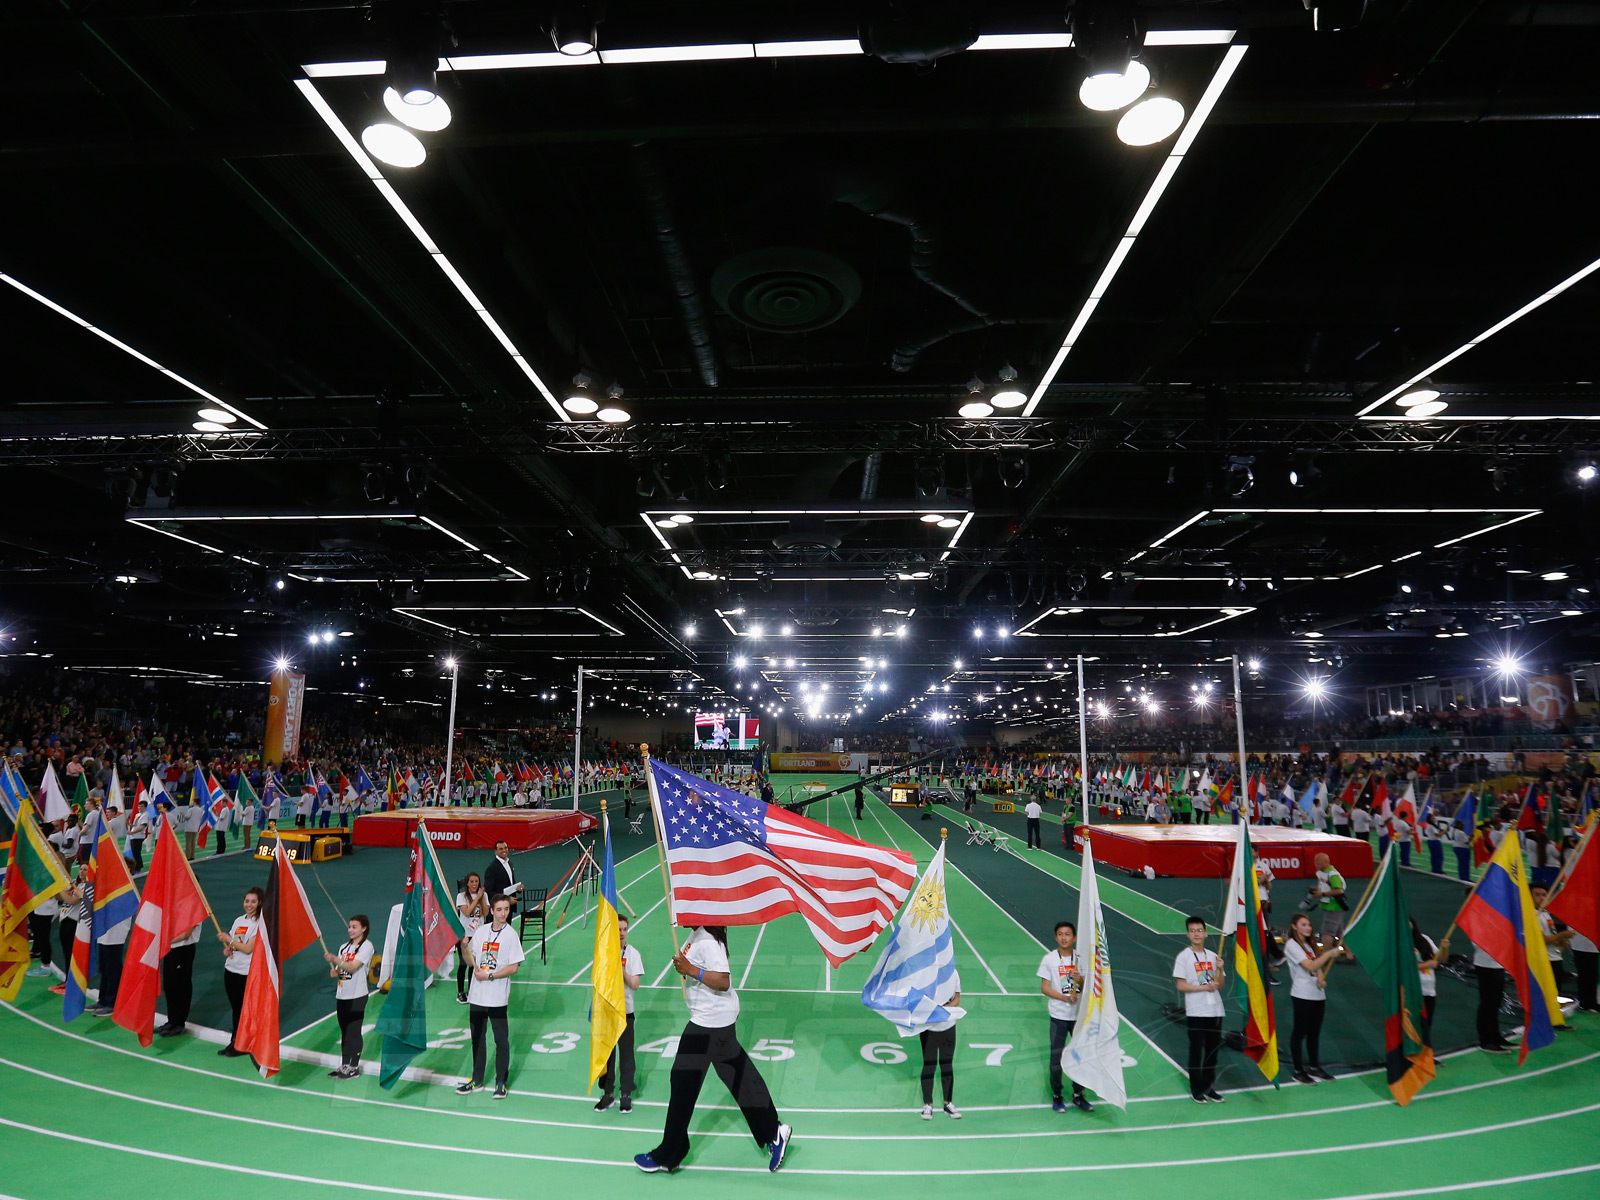 IAAF World Indoor Championships - Portland 2016 at the Oregon Convention Centre in Portland, Oregon – March 17 2016 / Getty Images for the IAAF